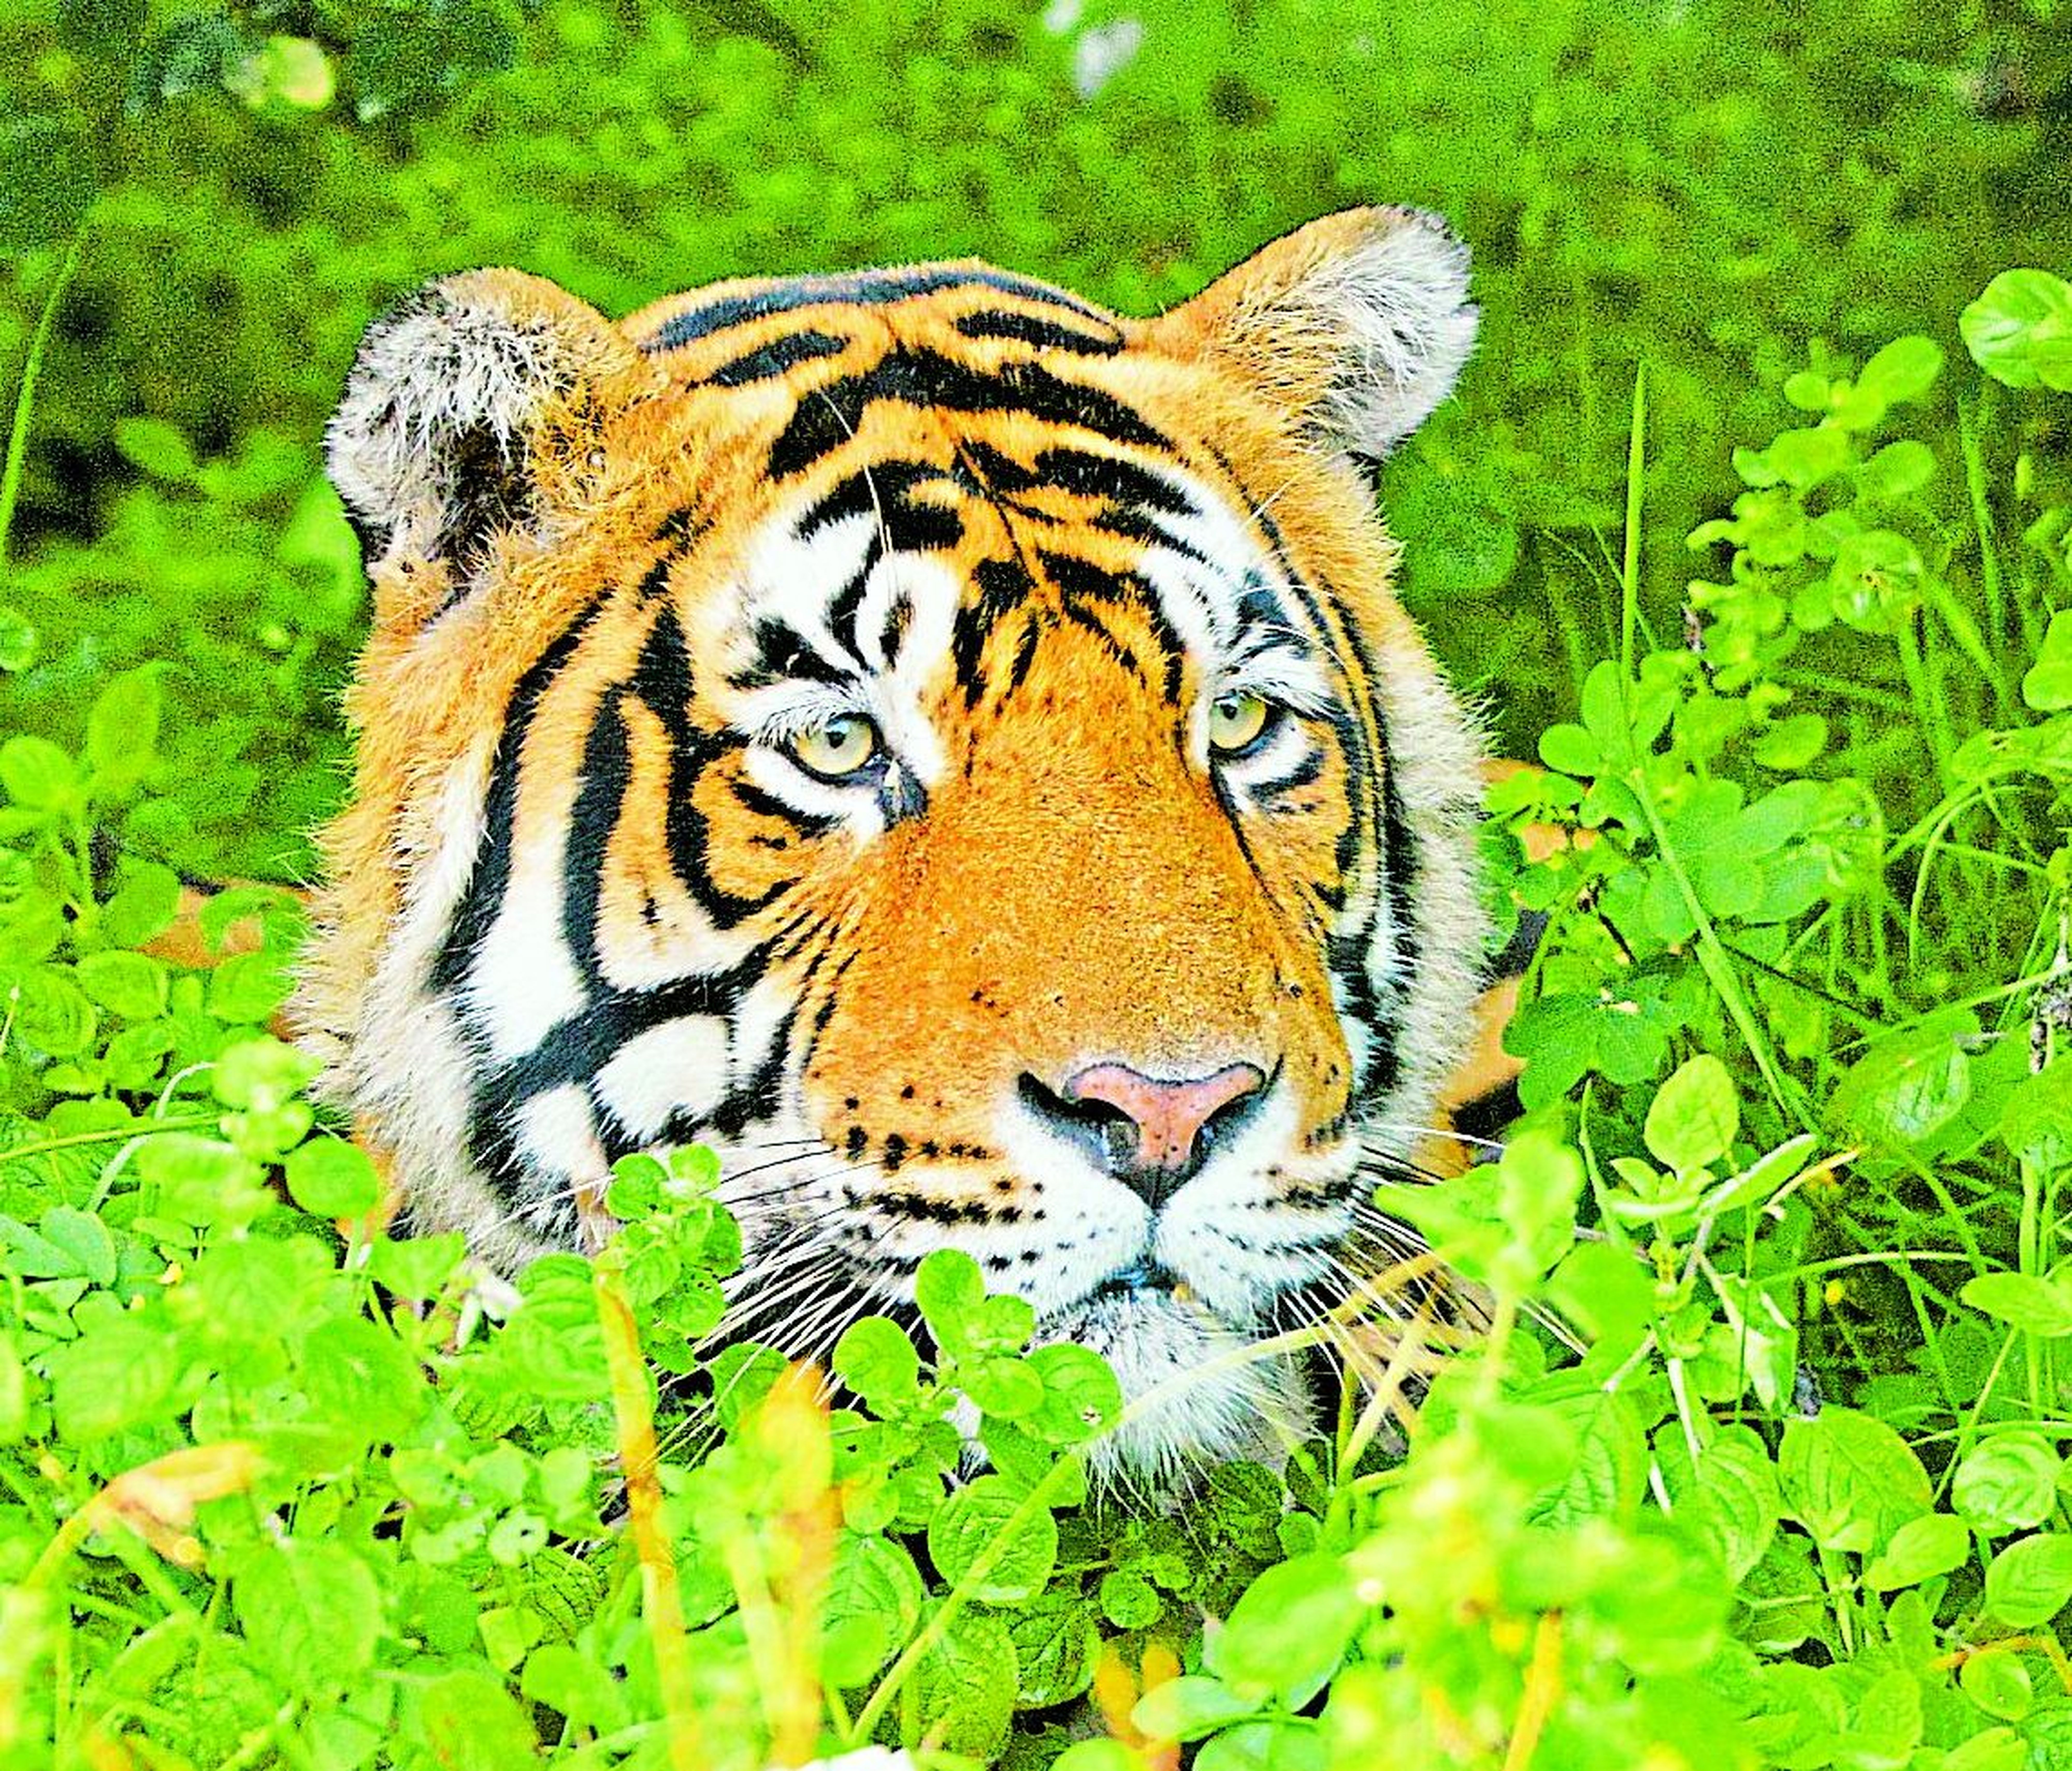 Food of tigers of Mukundara Reserve will come from Delhi